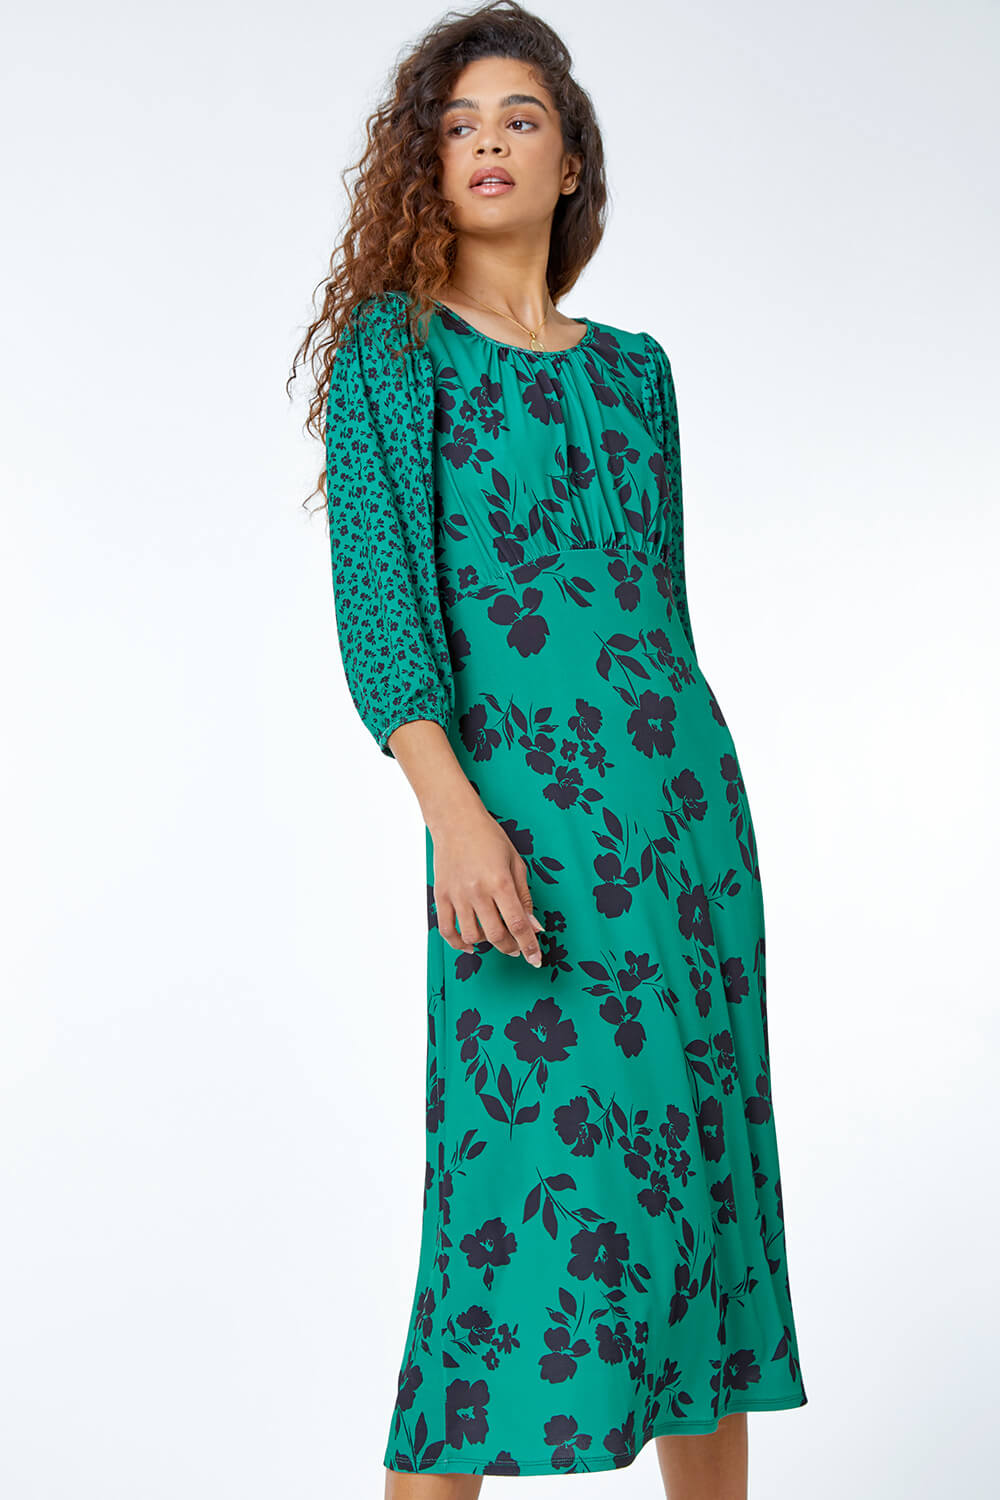 Green Floral Contrast Print Midi Dress, Image 4 of 5